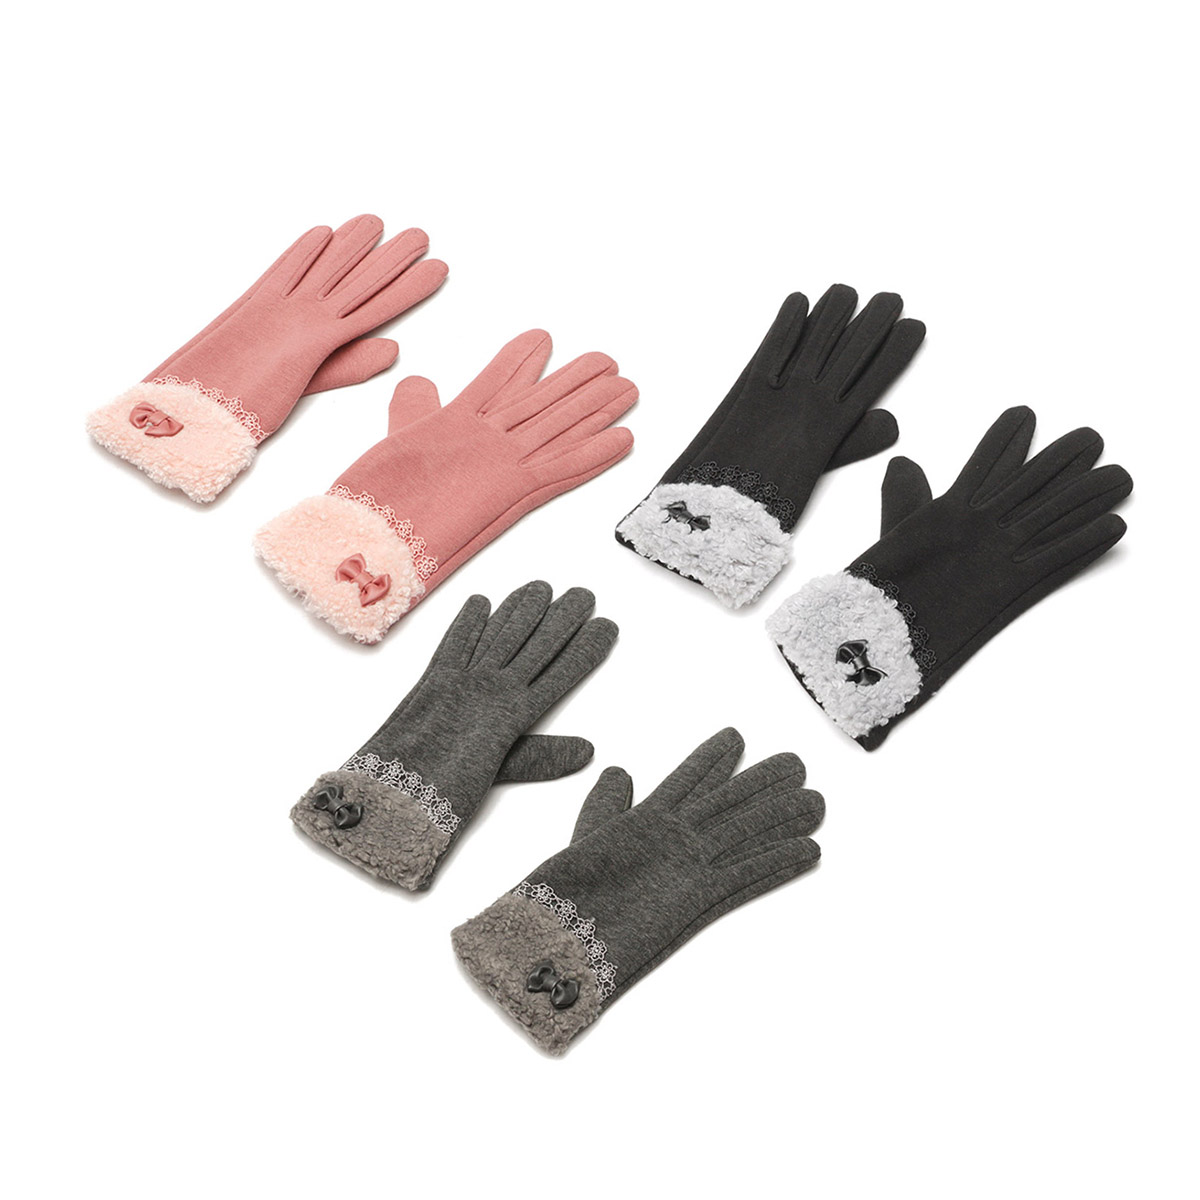 Women-Winter-Gloves-Touch-Screen-Warm-Gloves-Outdoor-Driving-Gloves-For-Smartphone-1095654-6